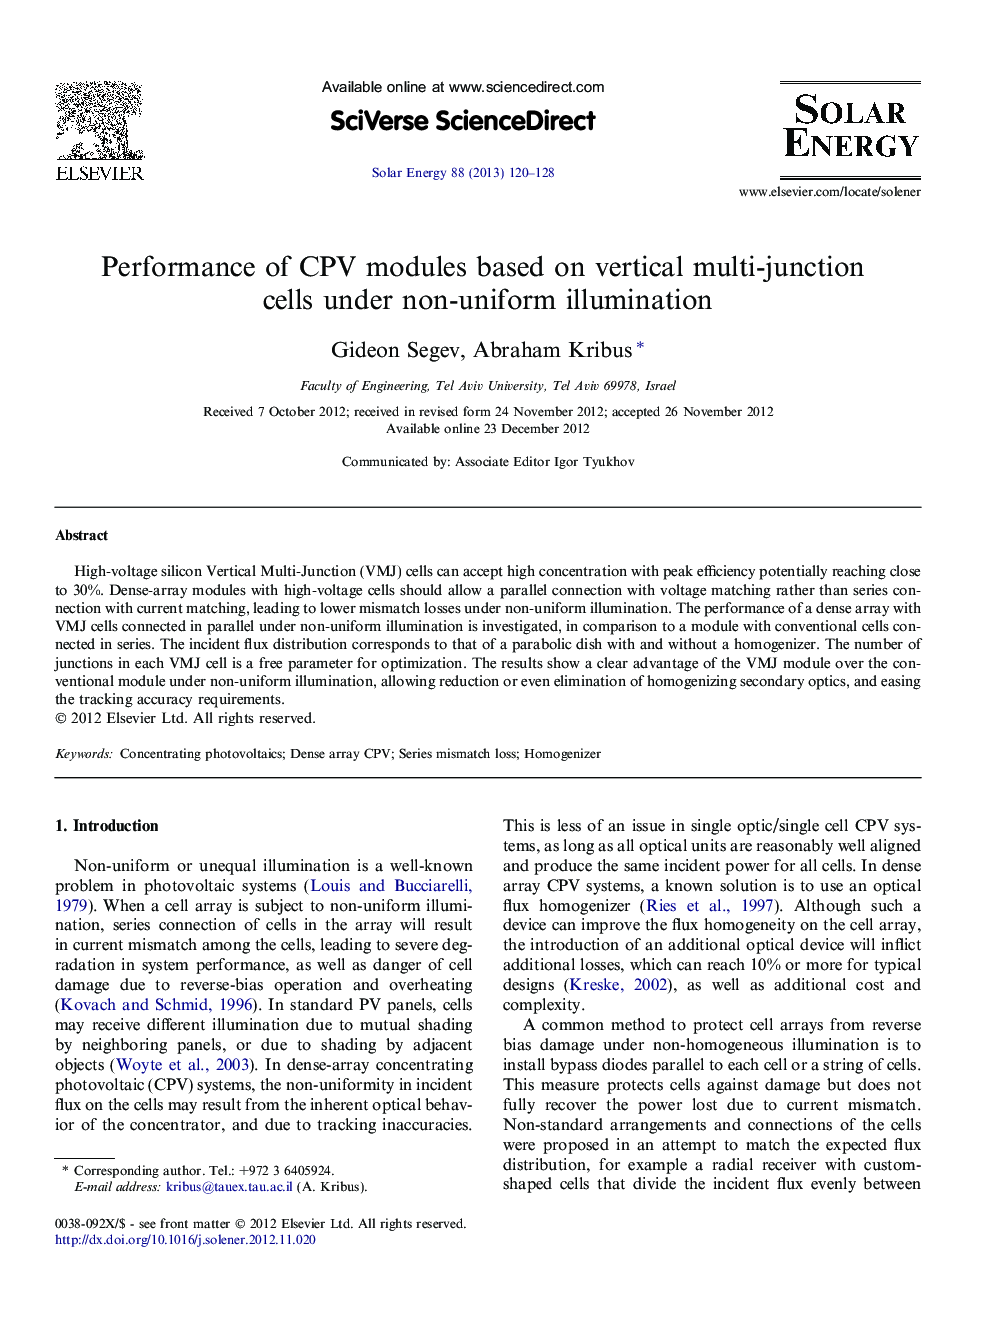 Performance of CPV modules based on vertical multi-junction cells under non-uniform illumination